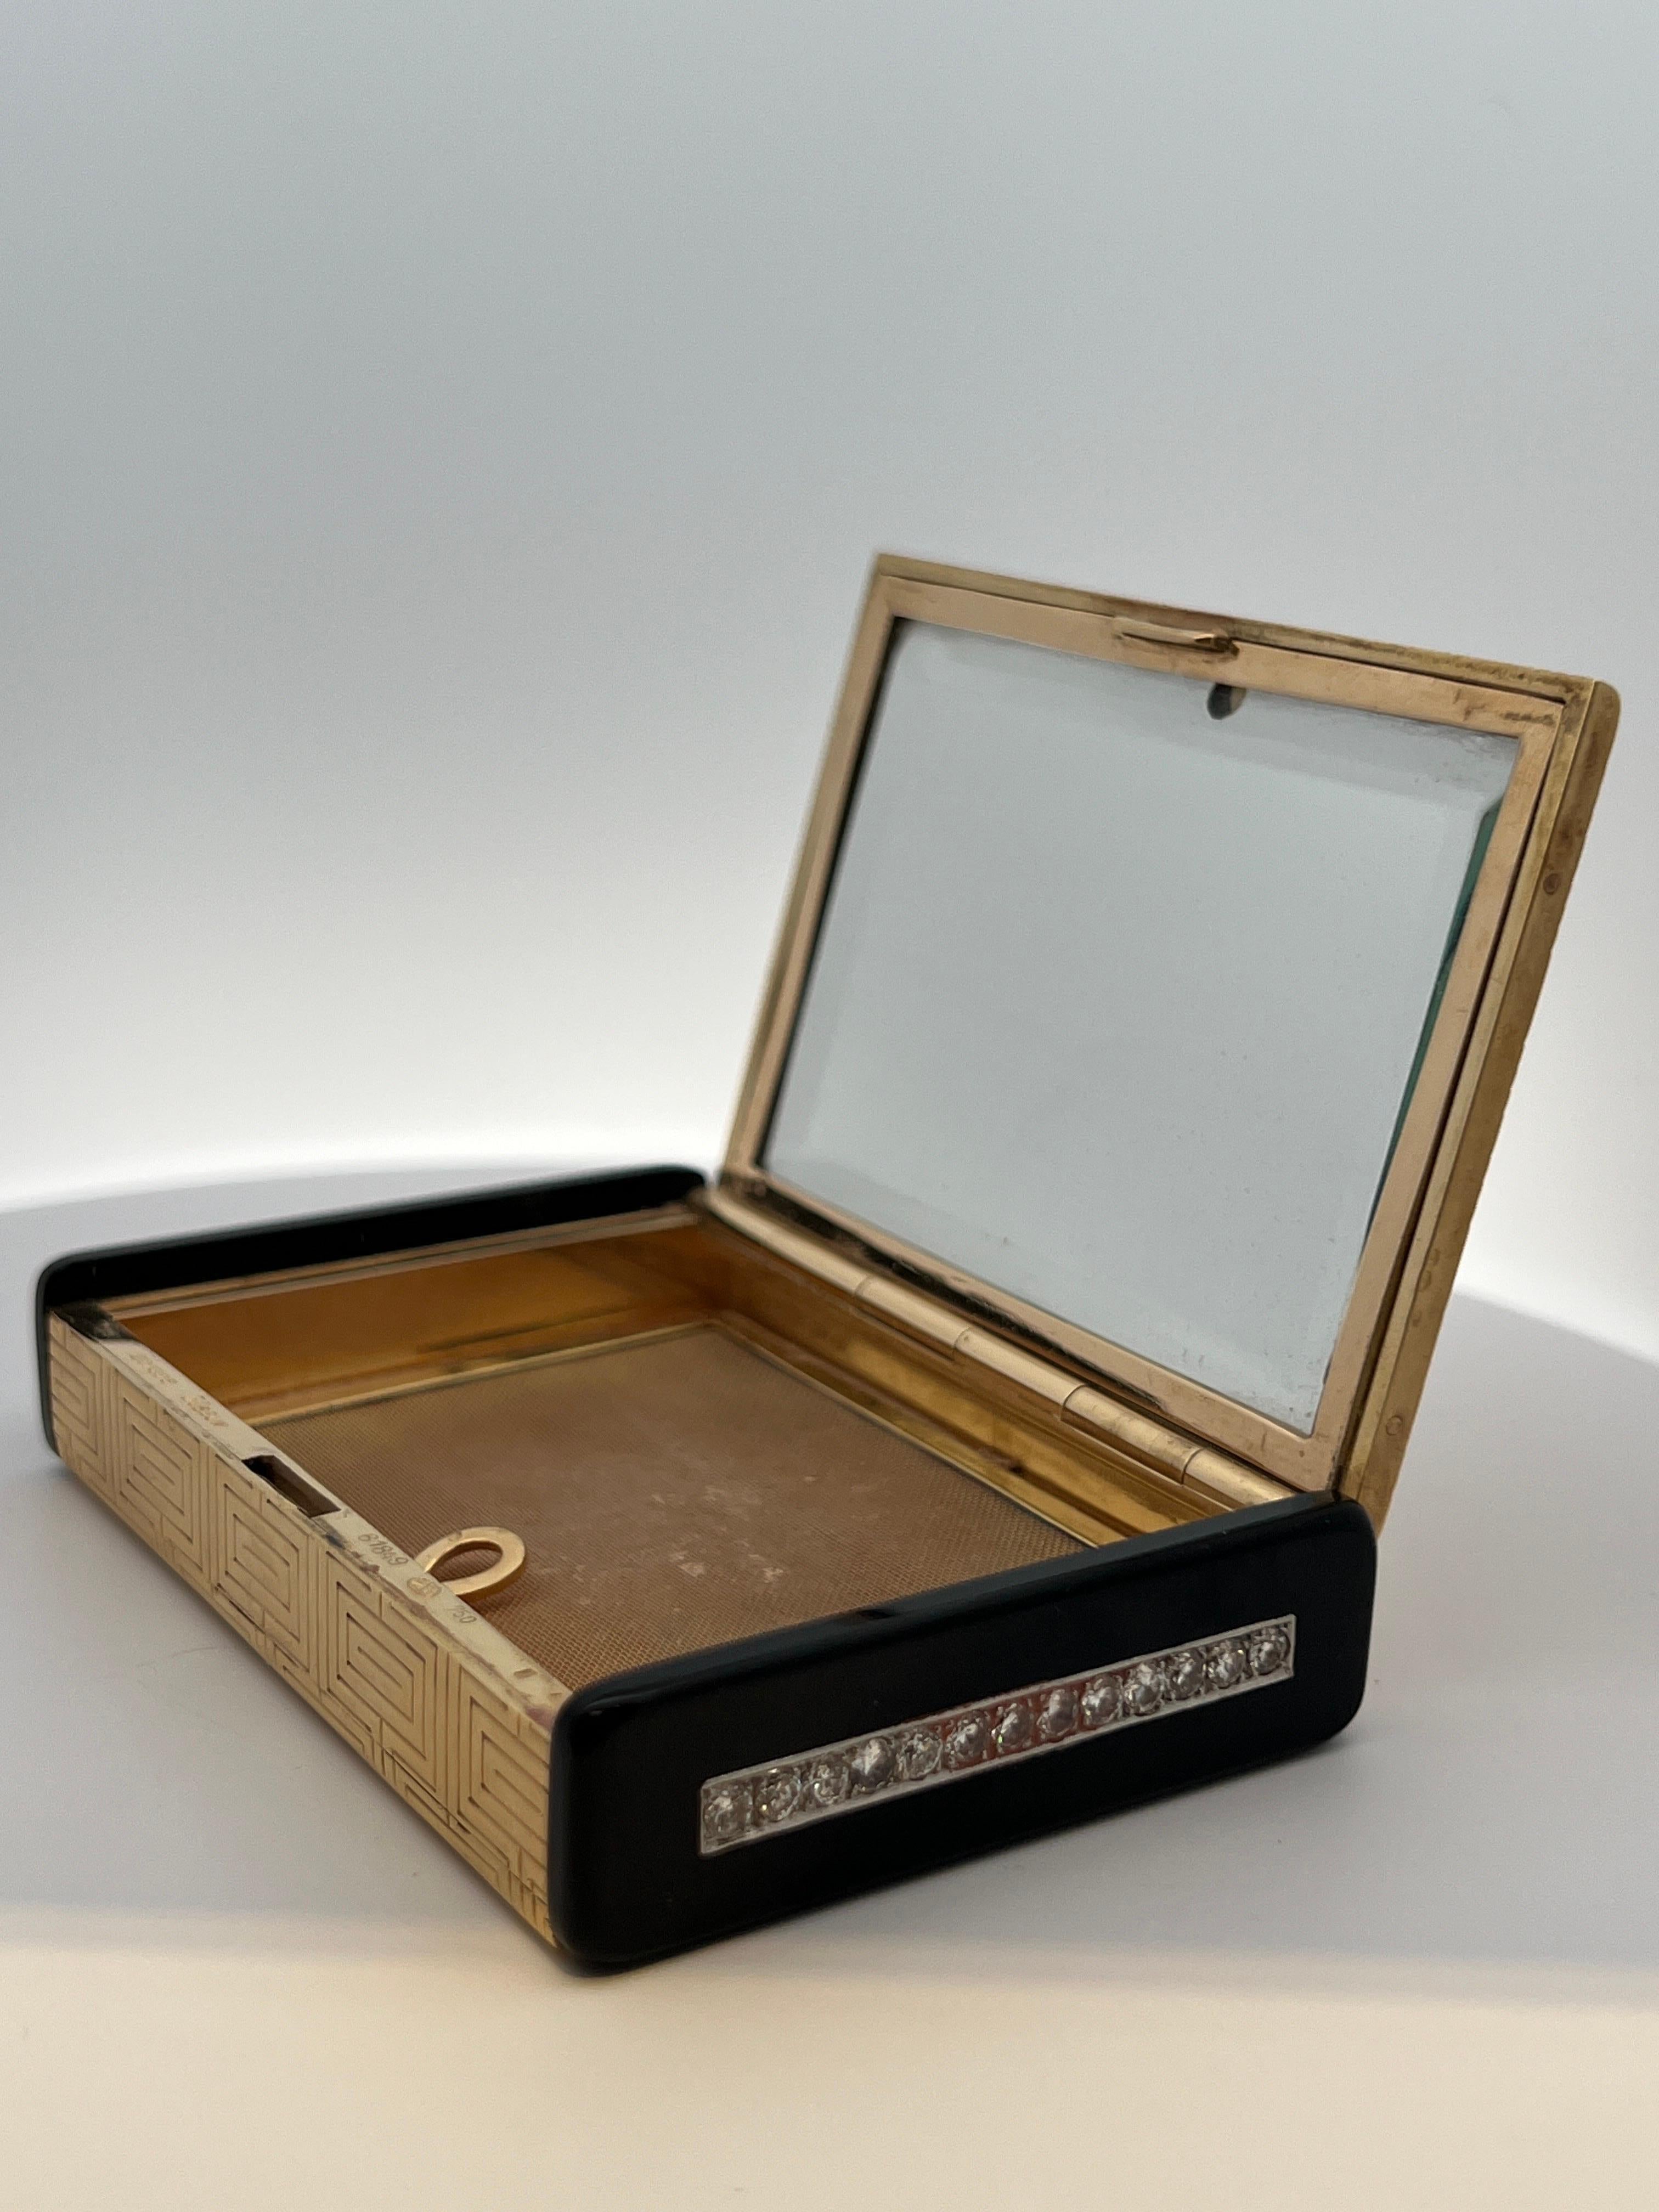 Gubelin Onyx and Diamond Compact Case

A gold compact with a geometric pattern, with onyx sides set with 26 round cut diamonds. The compact opens to a mirror and powder compartment.

Approximate Measurements:  3.25